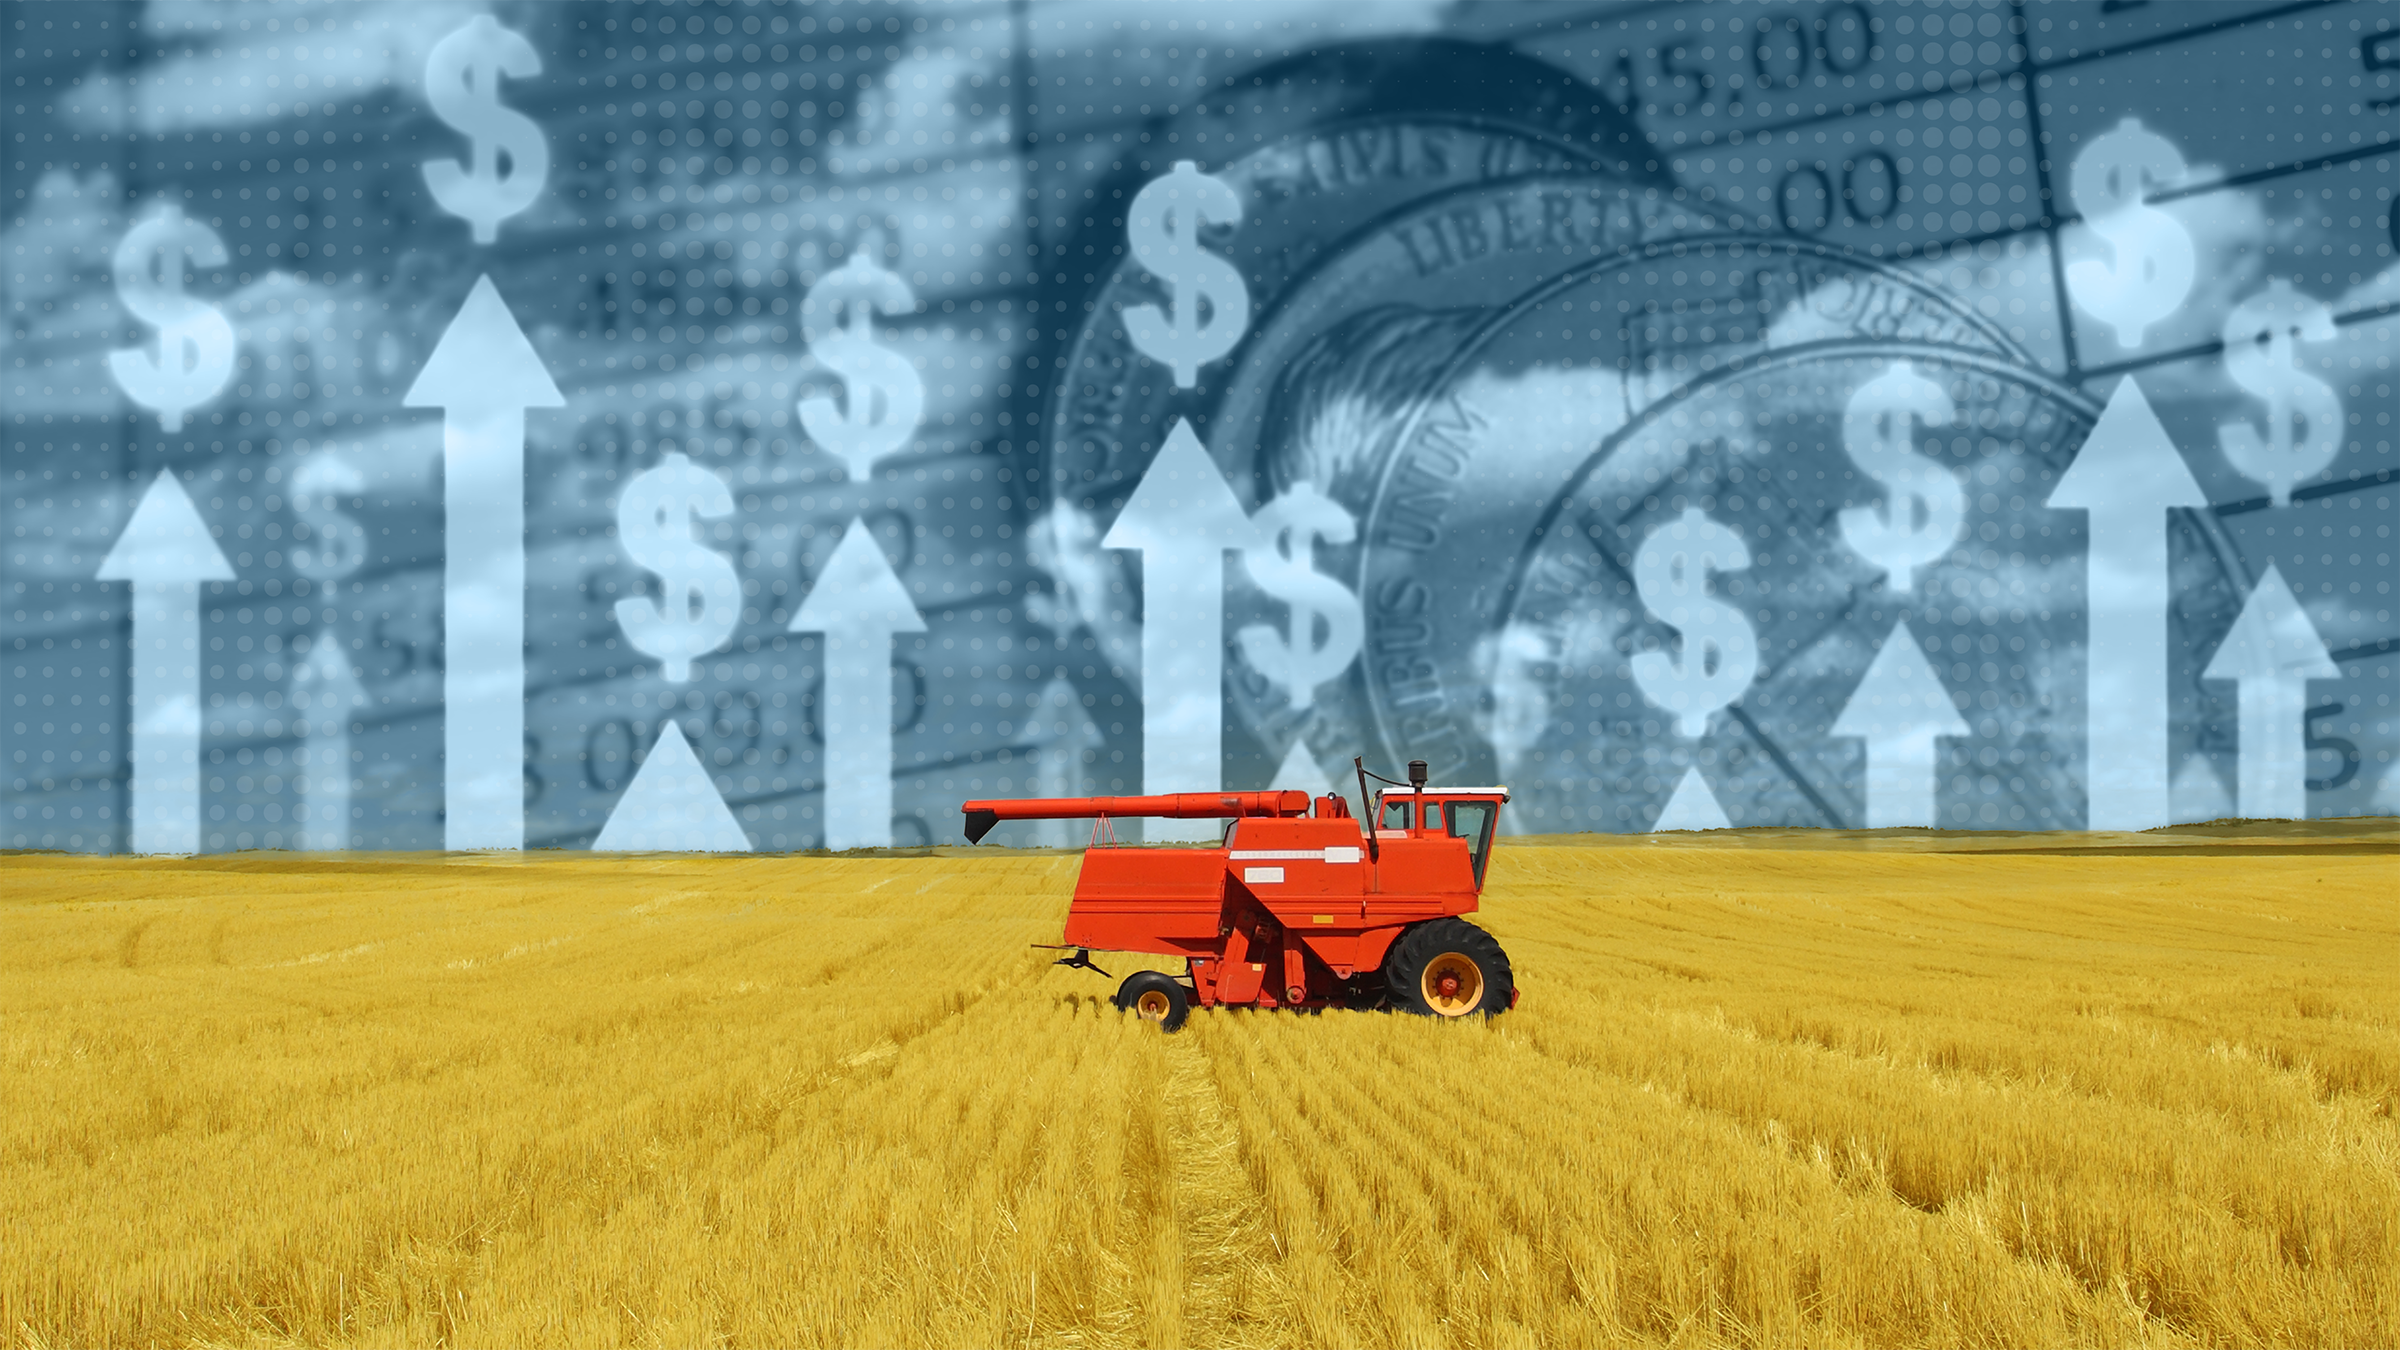 Tractor in a field in the foreground, symbols for rising inflation in the background